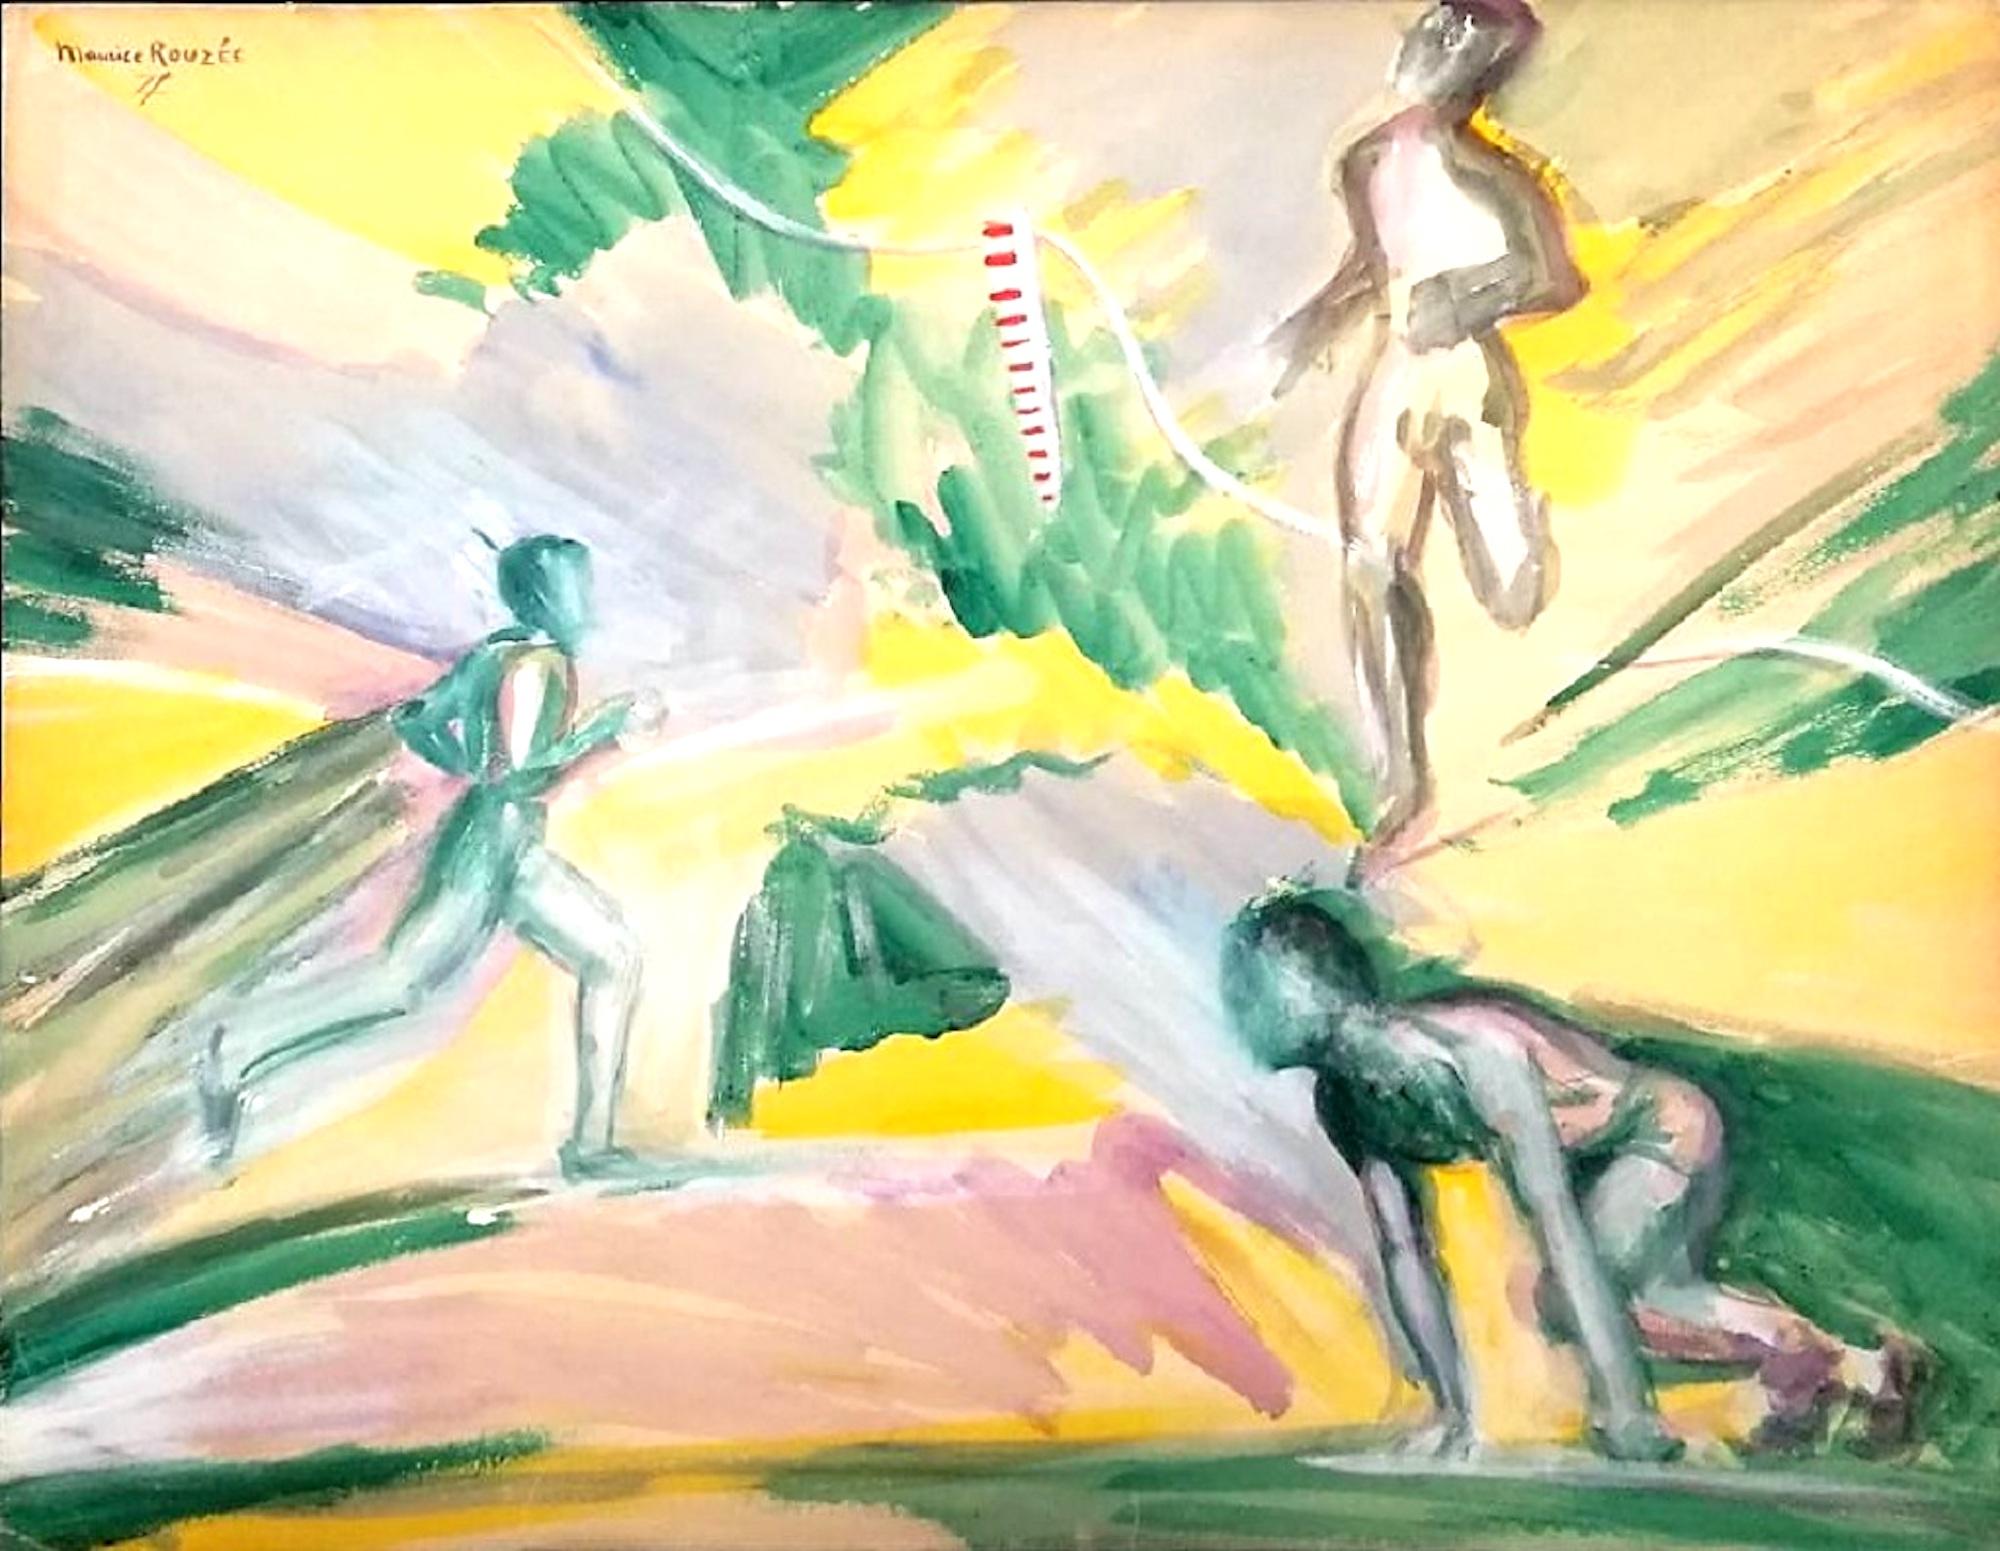 The Runner is an original artwork realized by Maurice Rouzée in the 1940s. Signed by the artist on the upper left margin. Good conditions, except for a small fold on the lower margin. 

The artwork represents a composition with three figures in